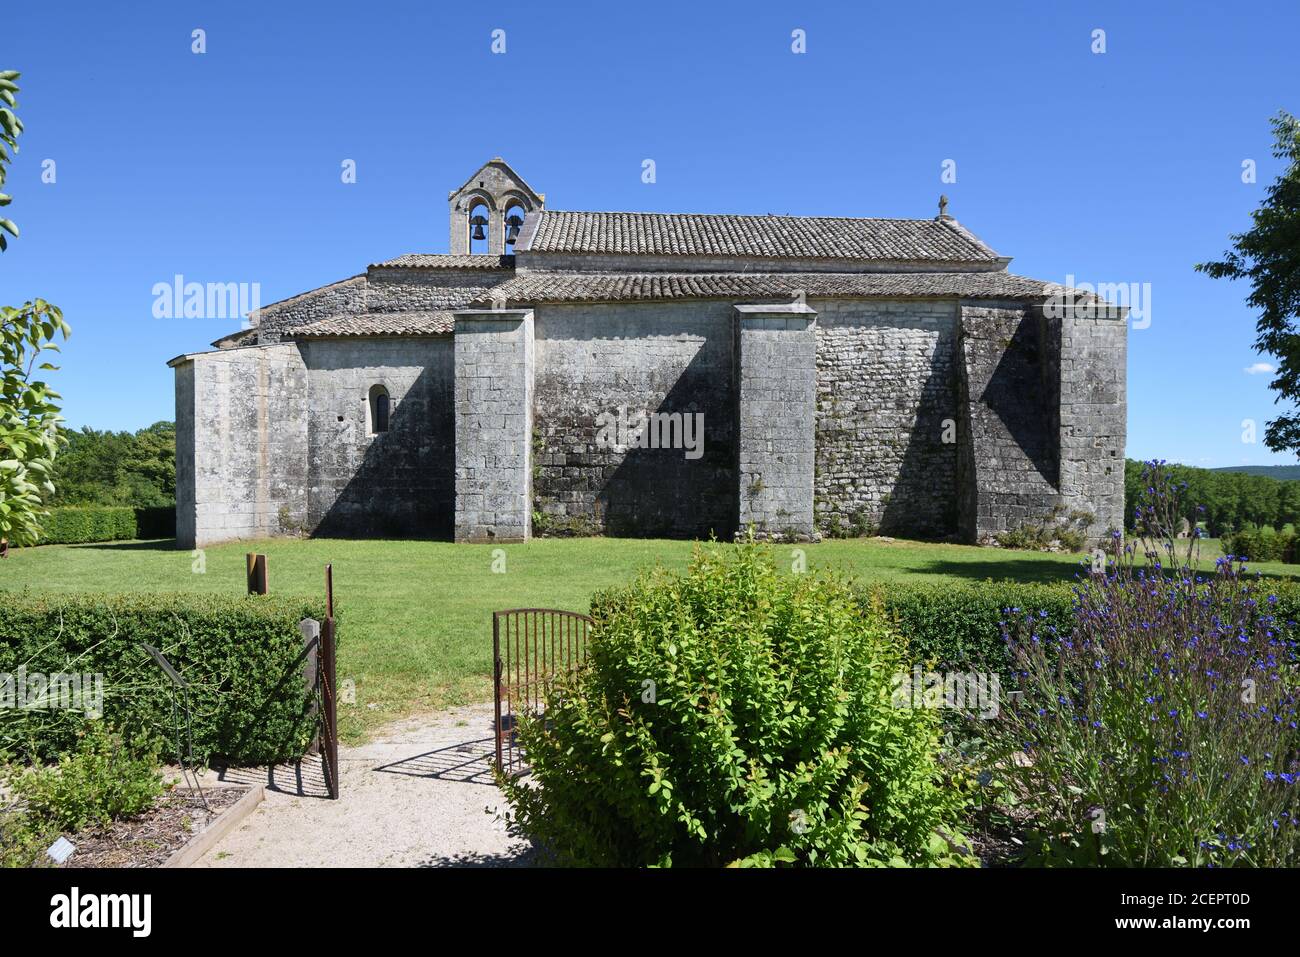 West Facade of the c12th Romanesque Salagon Abbey or Salagon Priory with Buttress Walls Mane Alpes-de-Haute-Provence Provence France Stock Photo